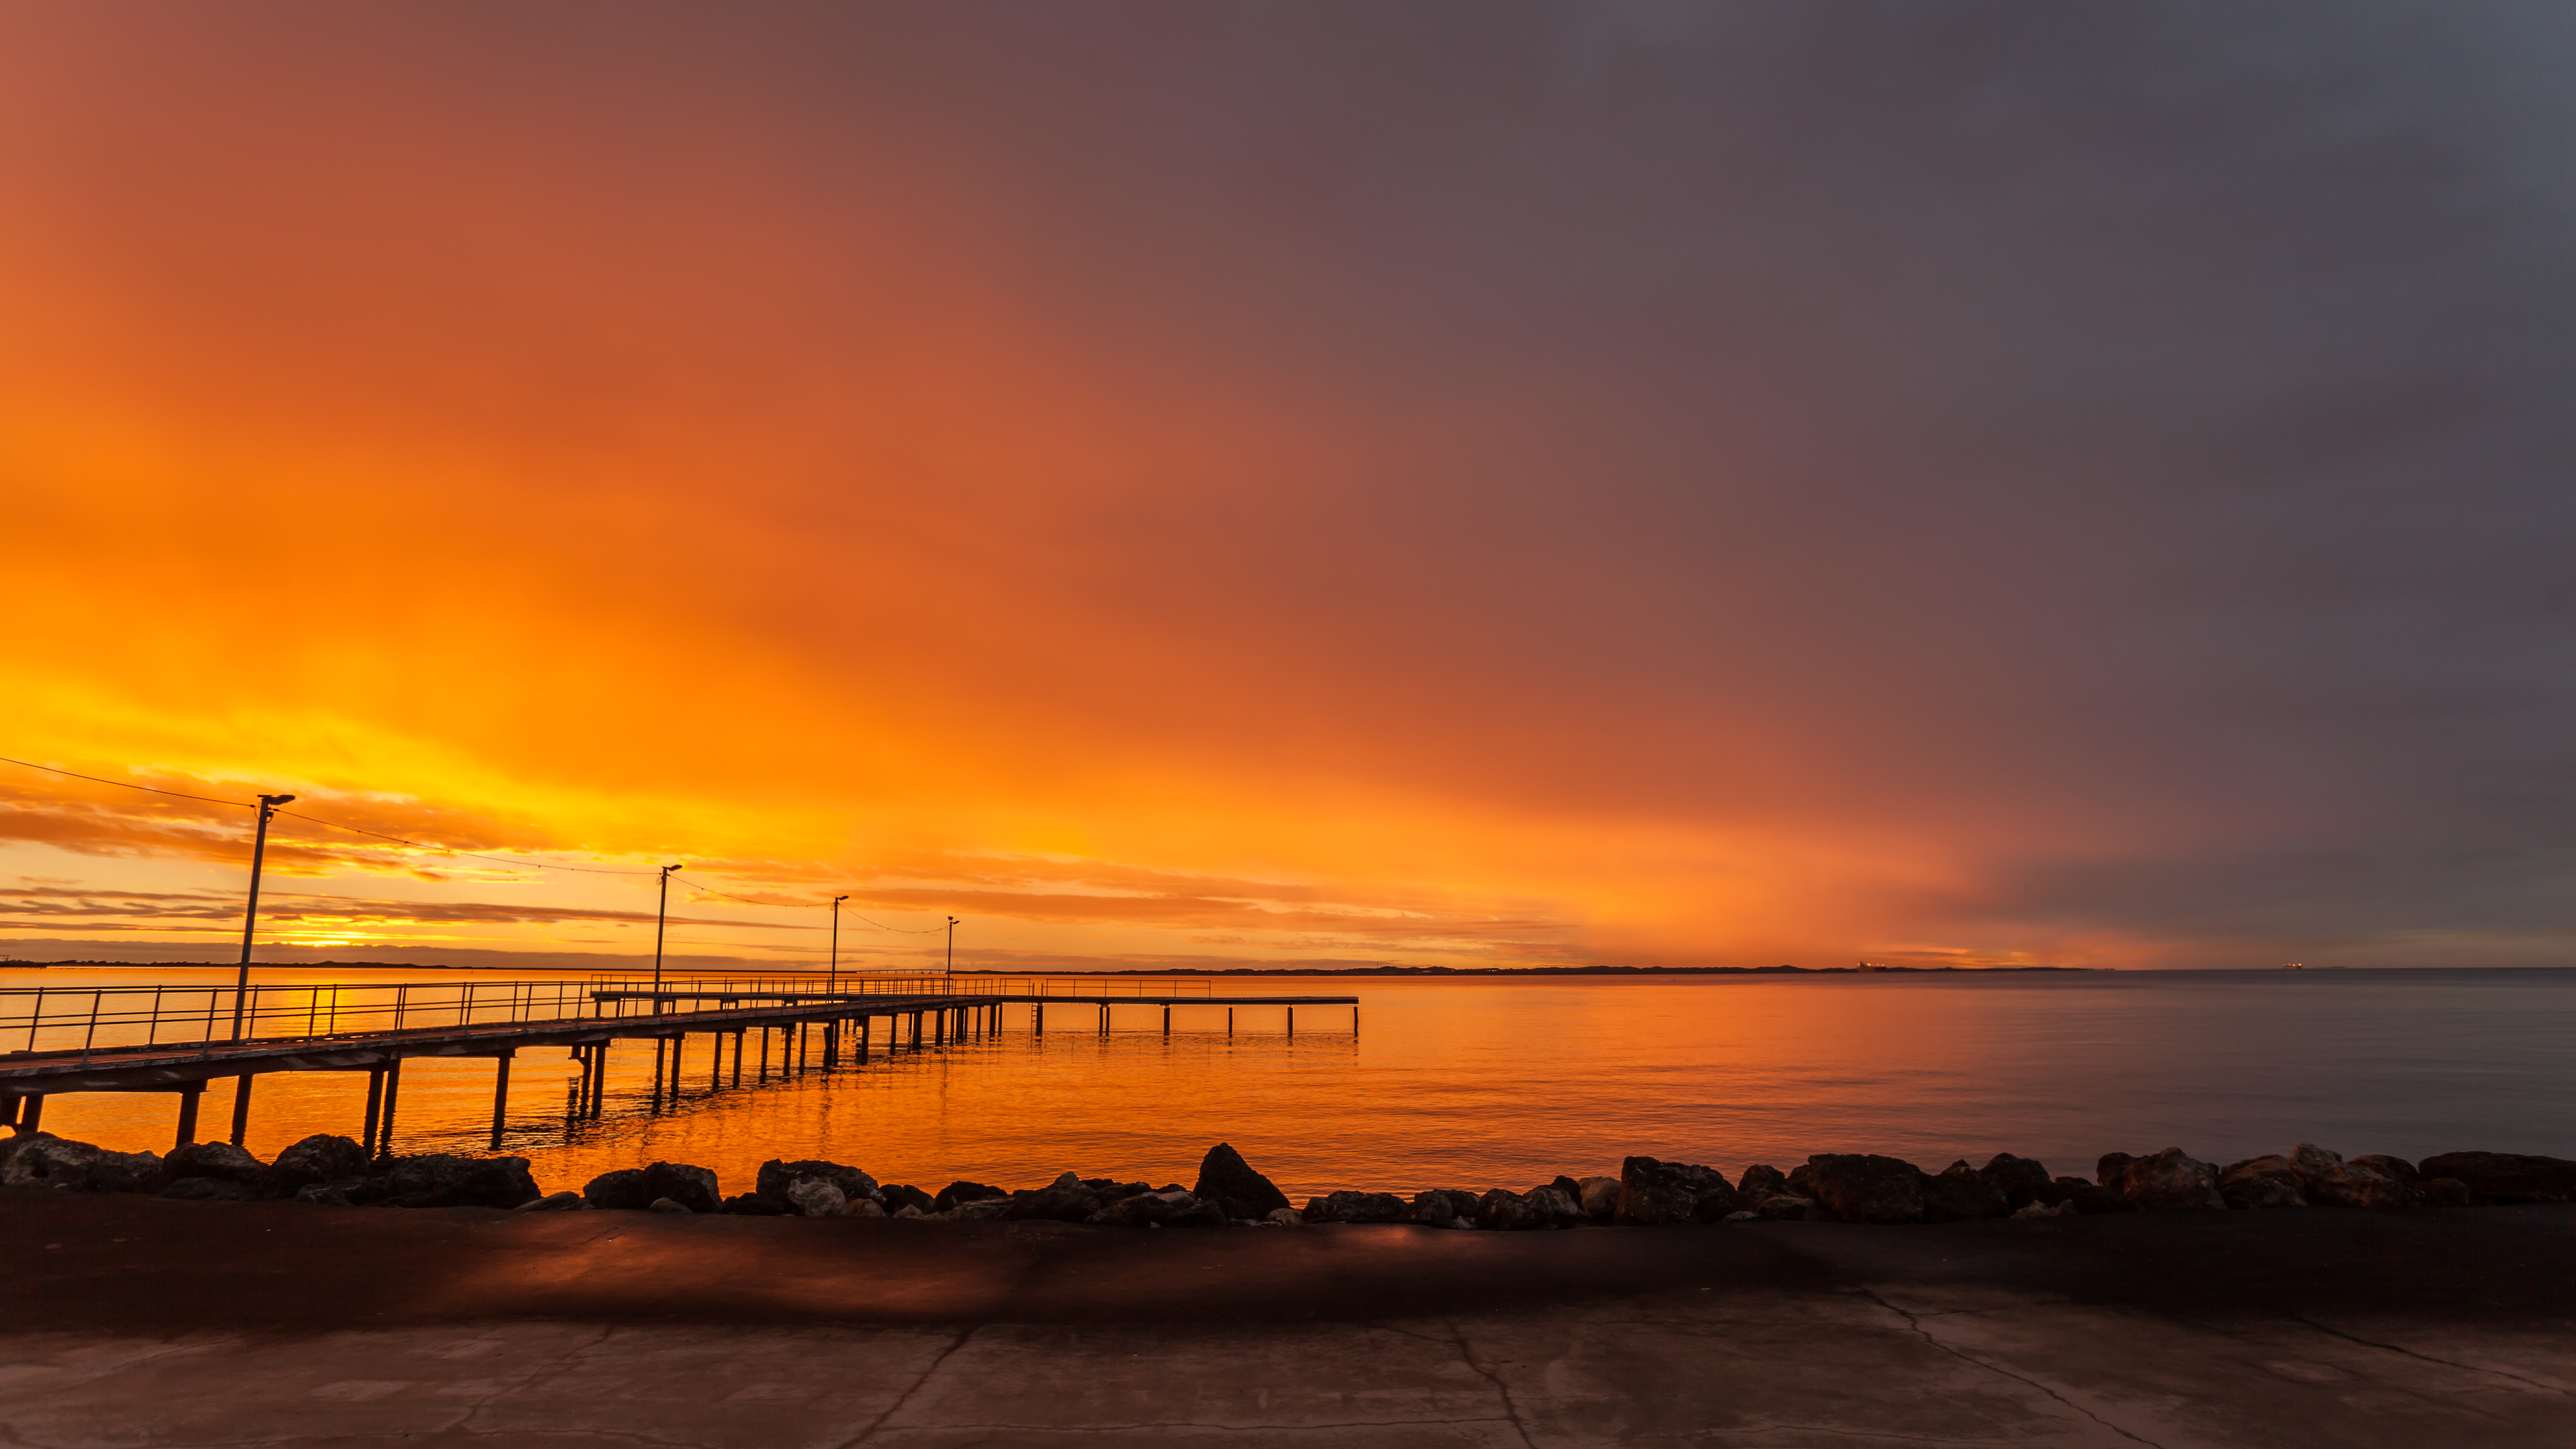 Fishing Pier At Sunset 2 – Duncan.co